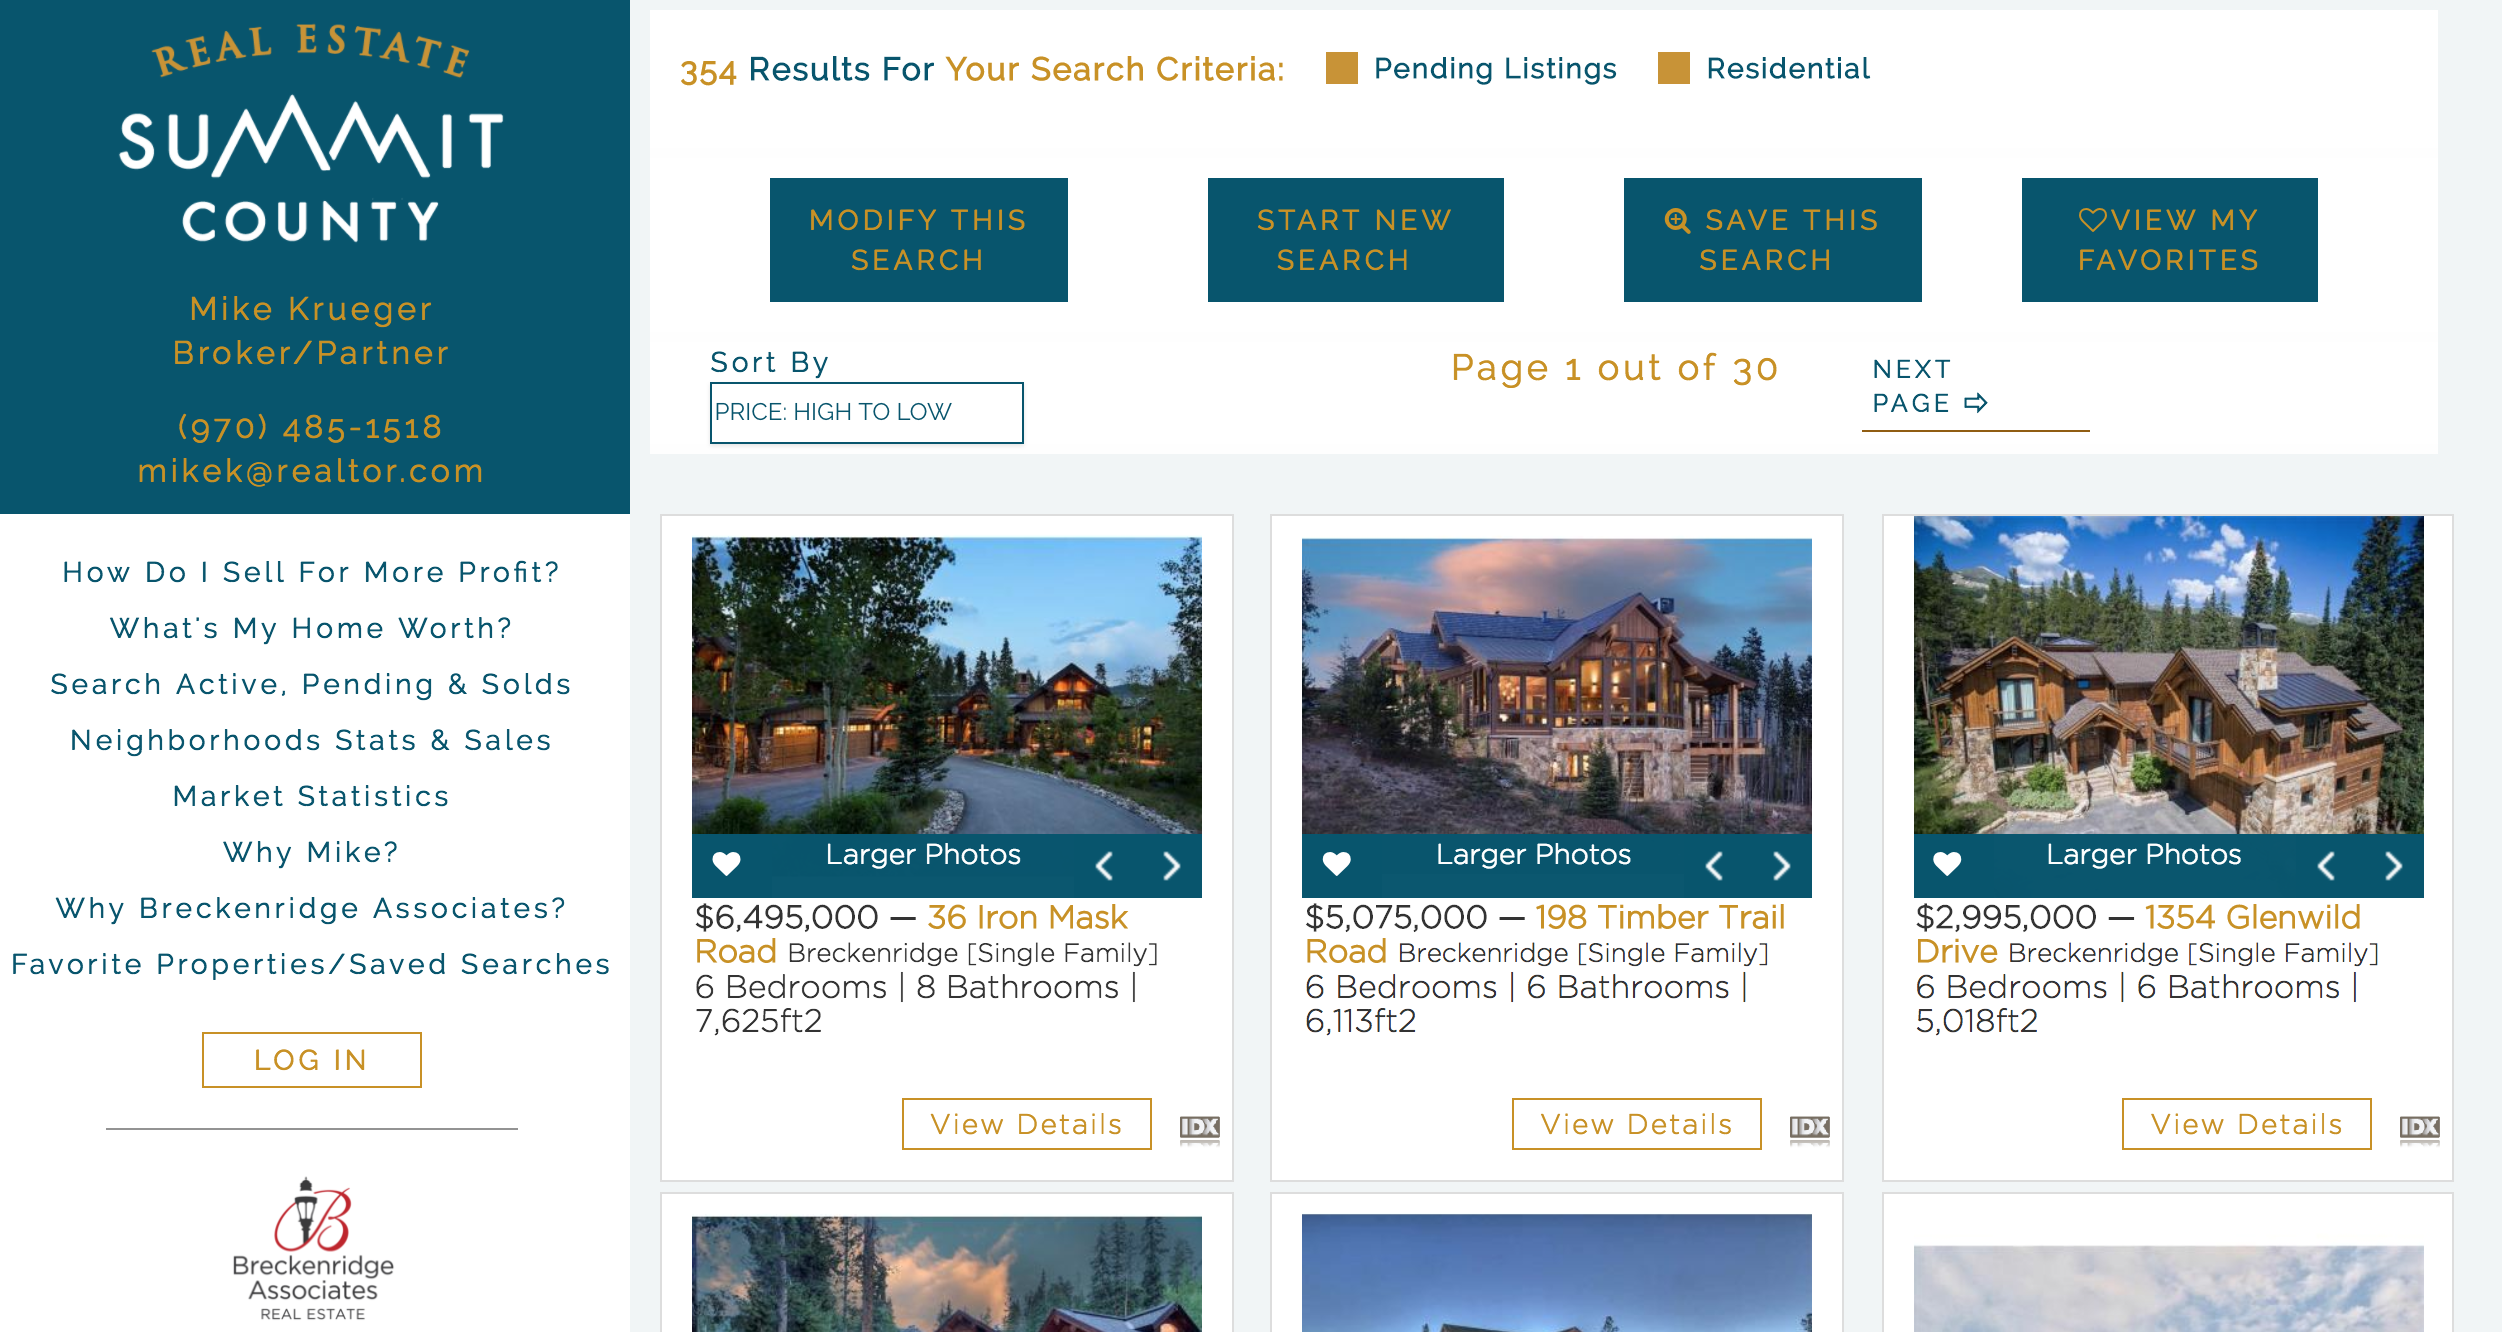 a screenshot of the results page at Real Estate Summit County